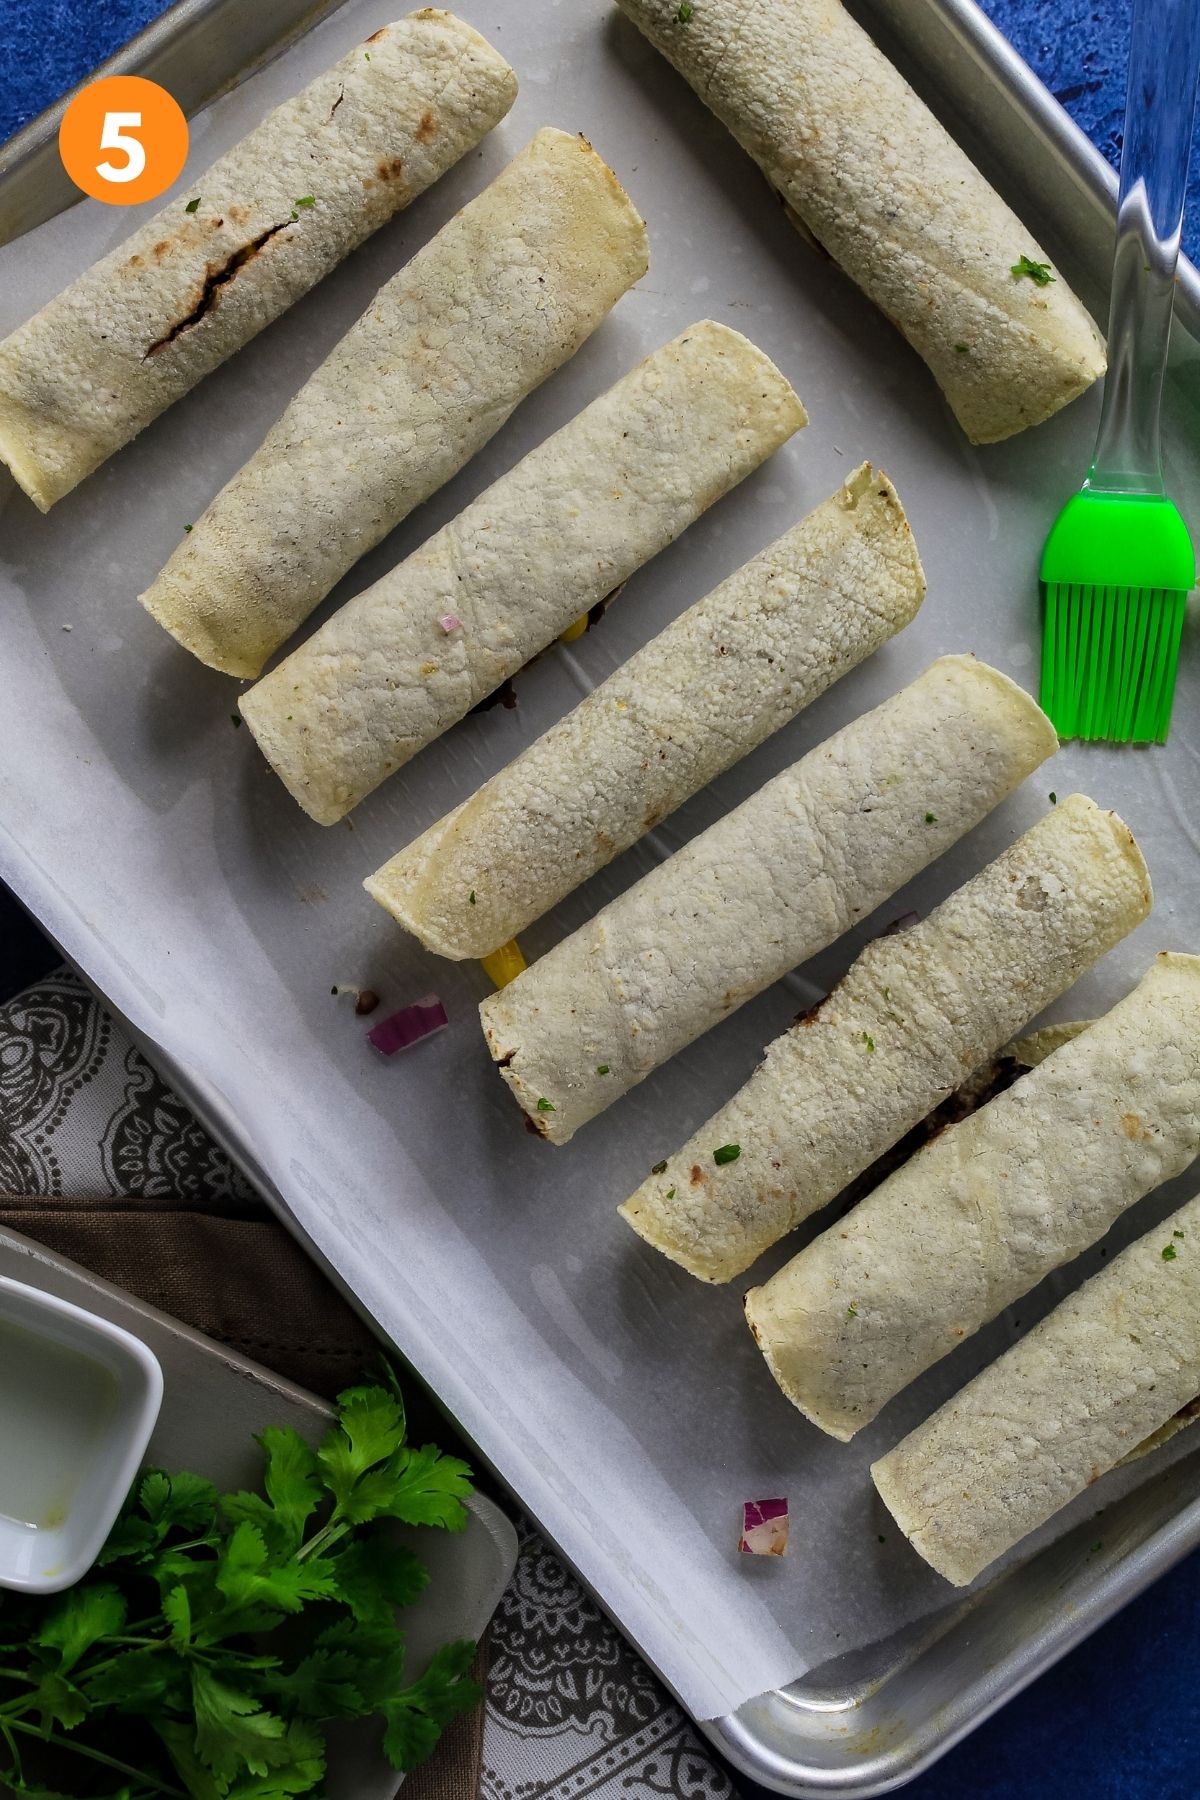 Rolled uncooked taquitos on baking sheet